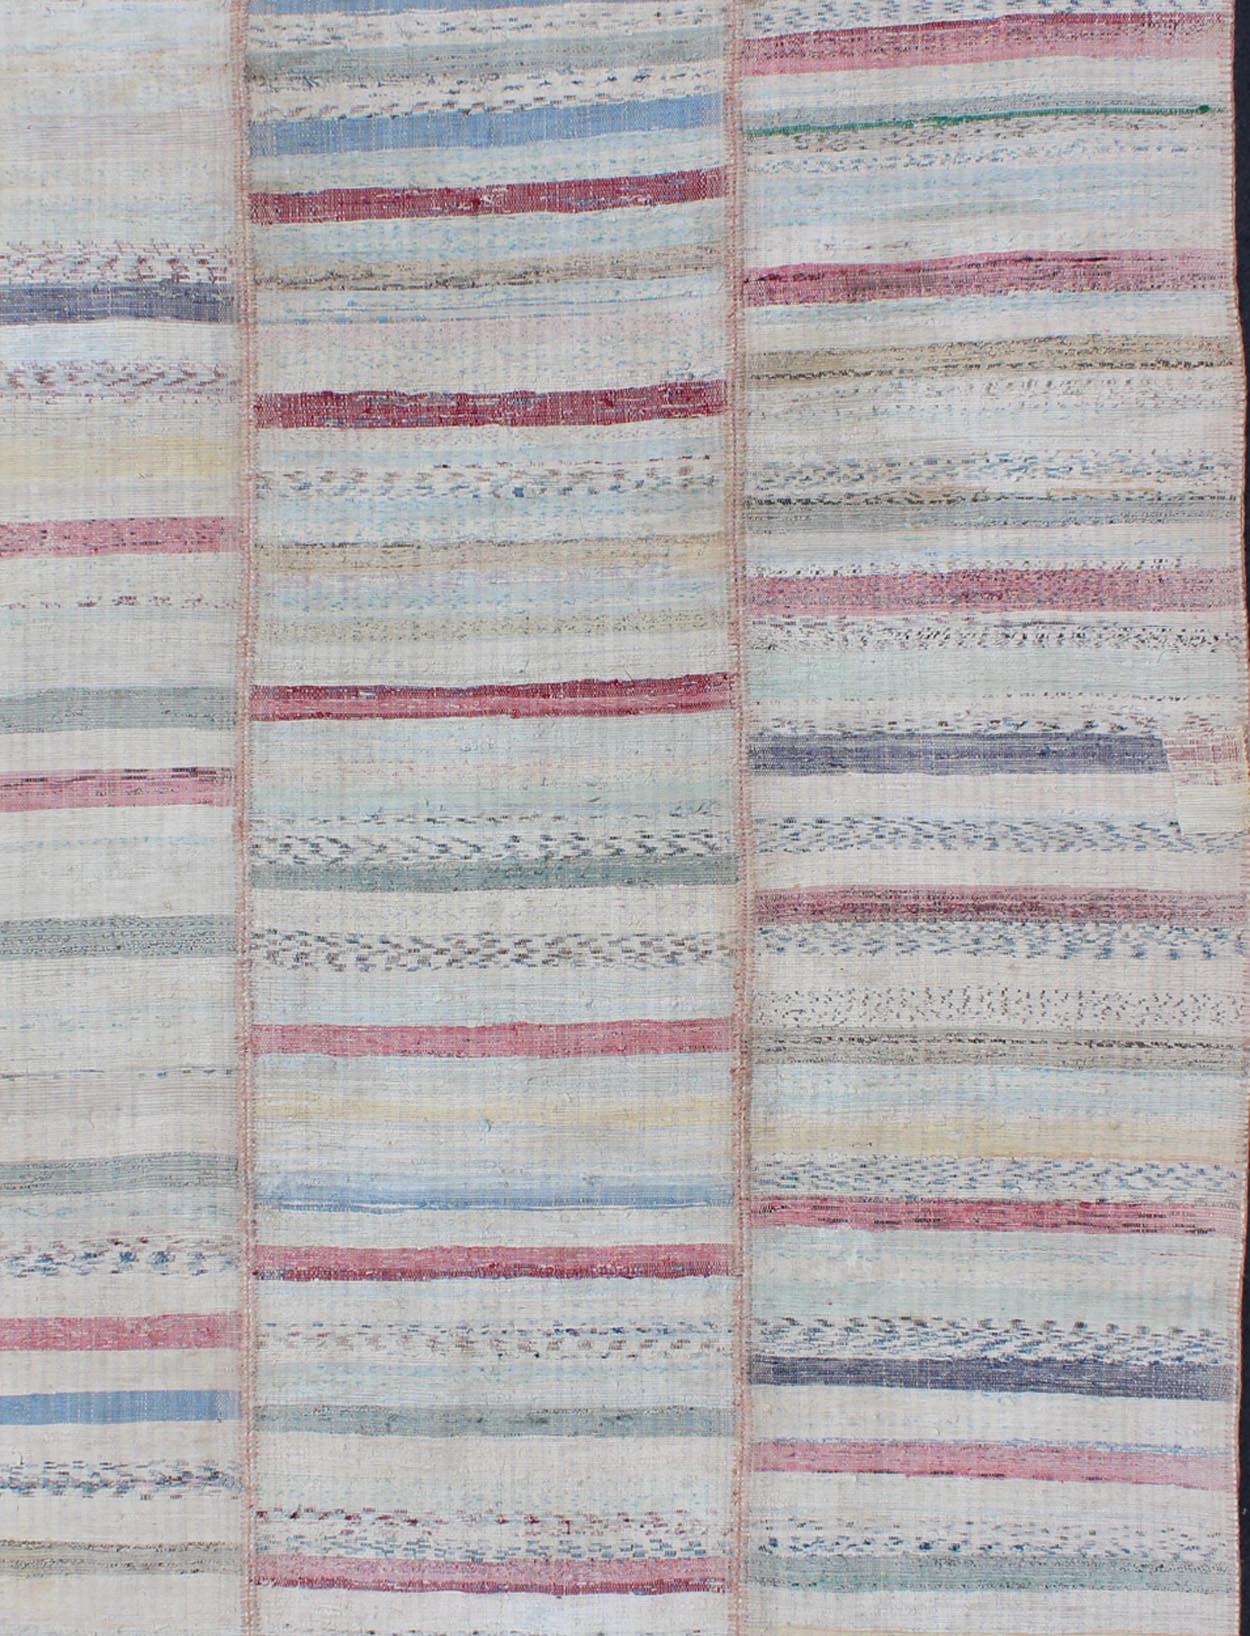 Hand-Woven Multi-Panel Vintage Turkish Flat Weave Rug in Pink, Blue, Green and Cream For Sale